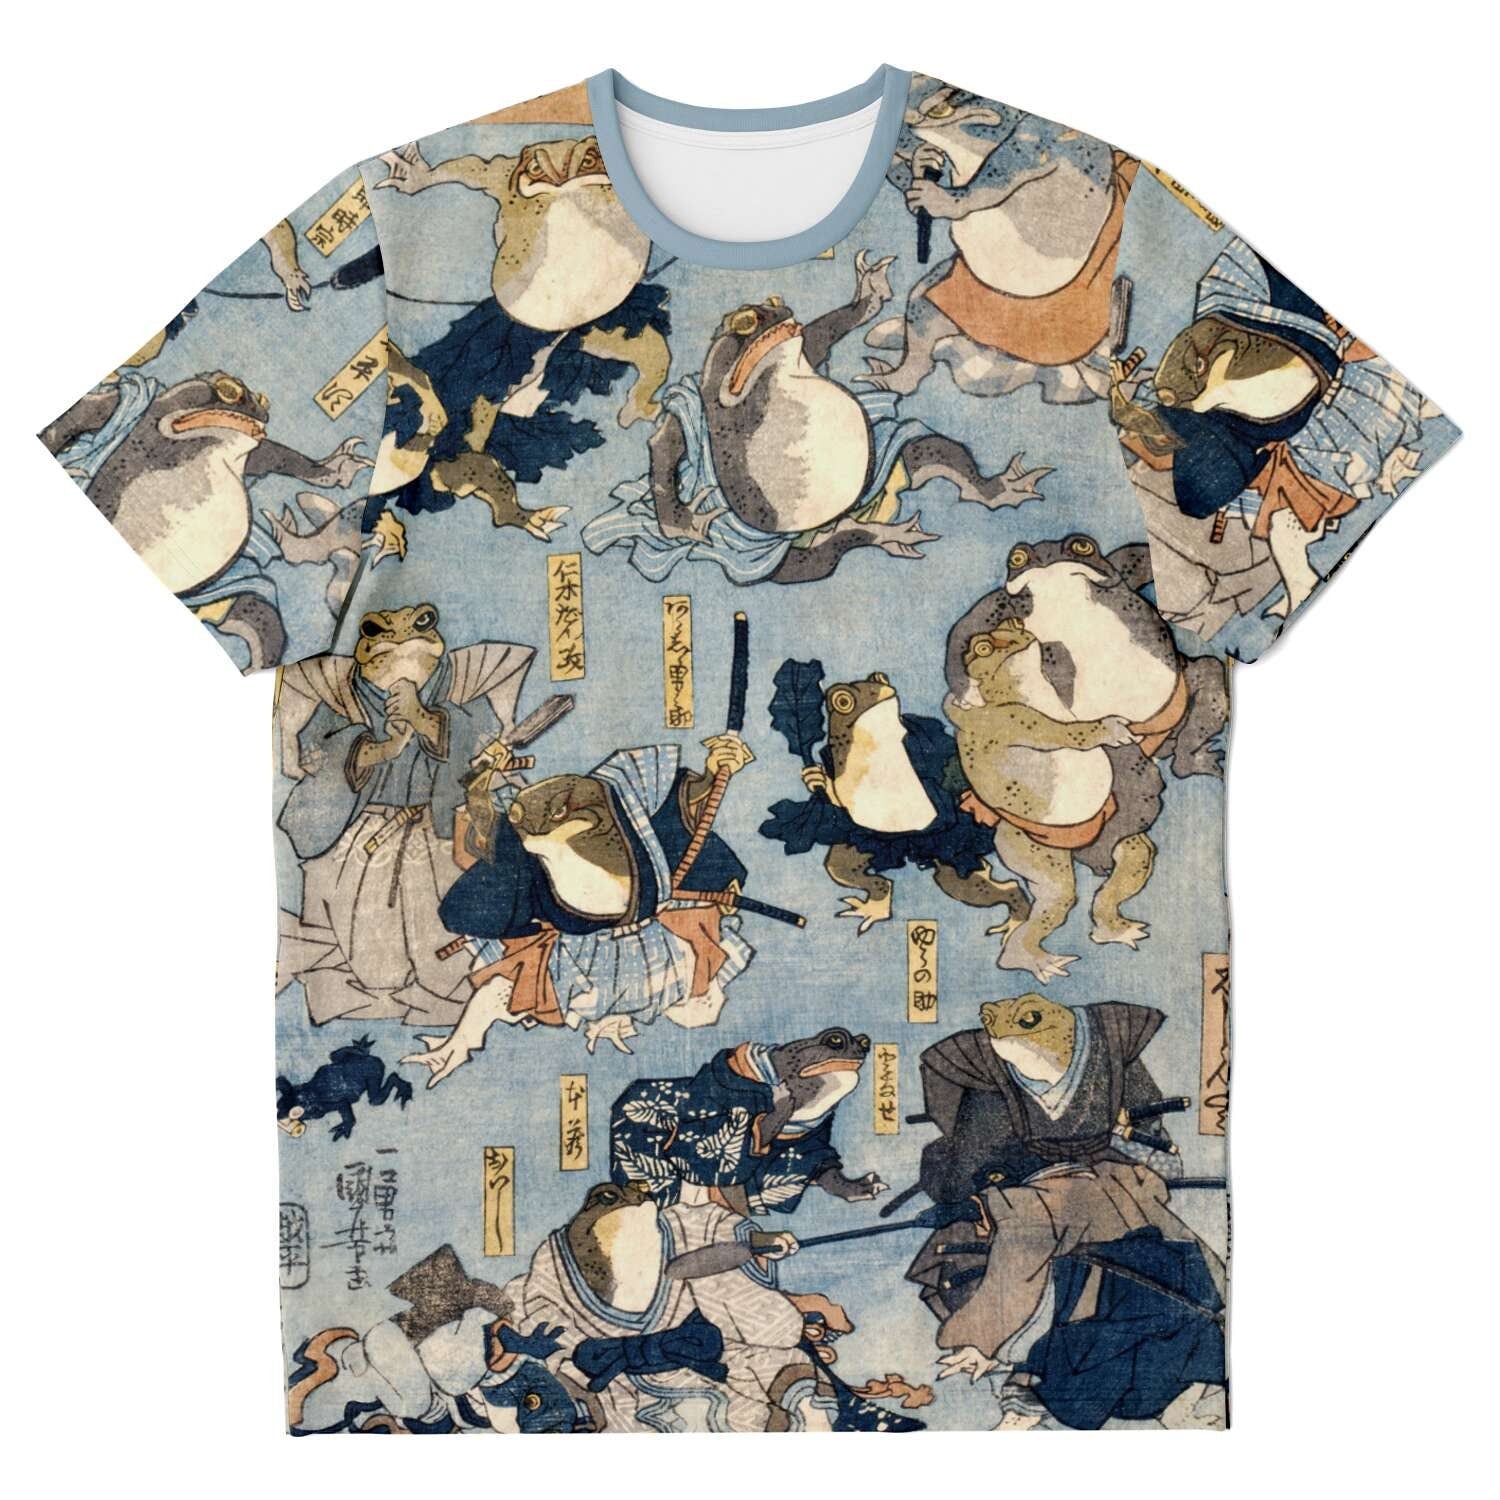 Utagawa, Kuniyoshi: Famous Heroes of The Kabuki Stage Played by Frogs Toads Funny Antique Kawaii Vintage Japanese Graphic Art Tee T-Shirt, 4XL